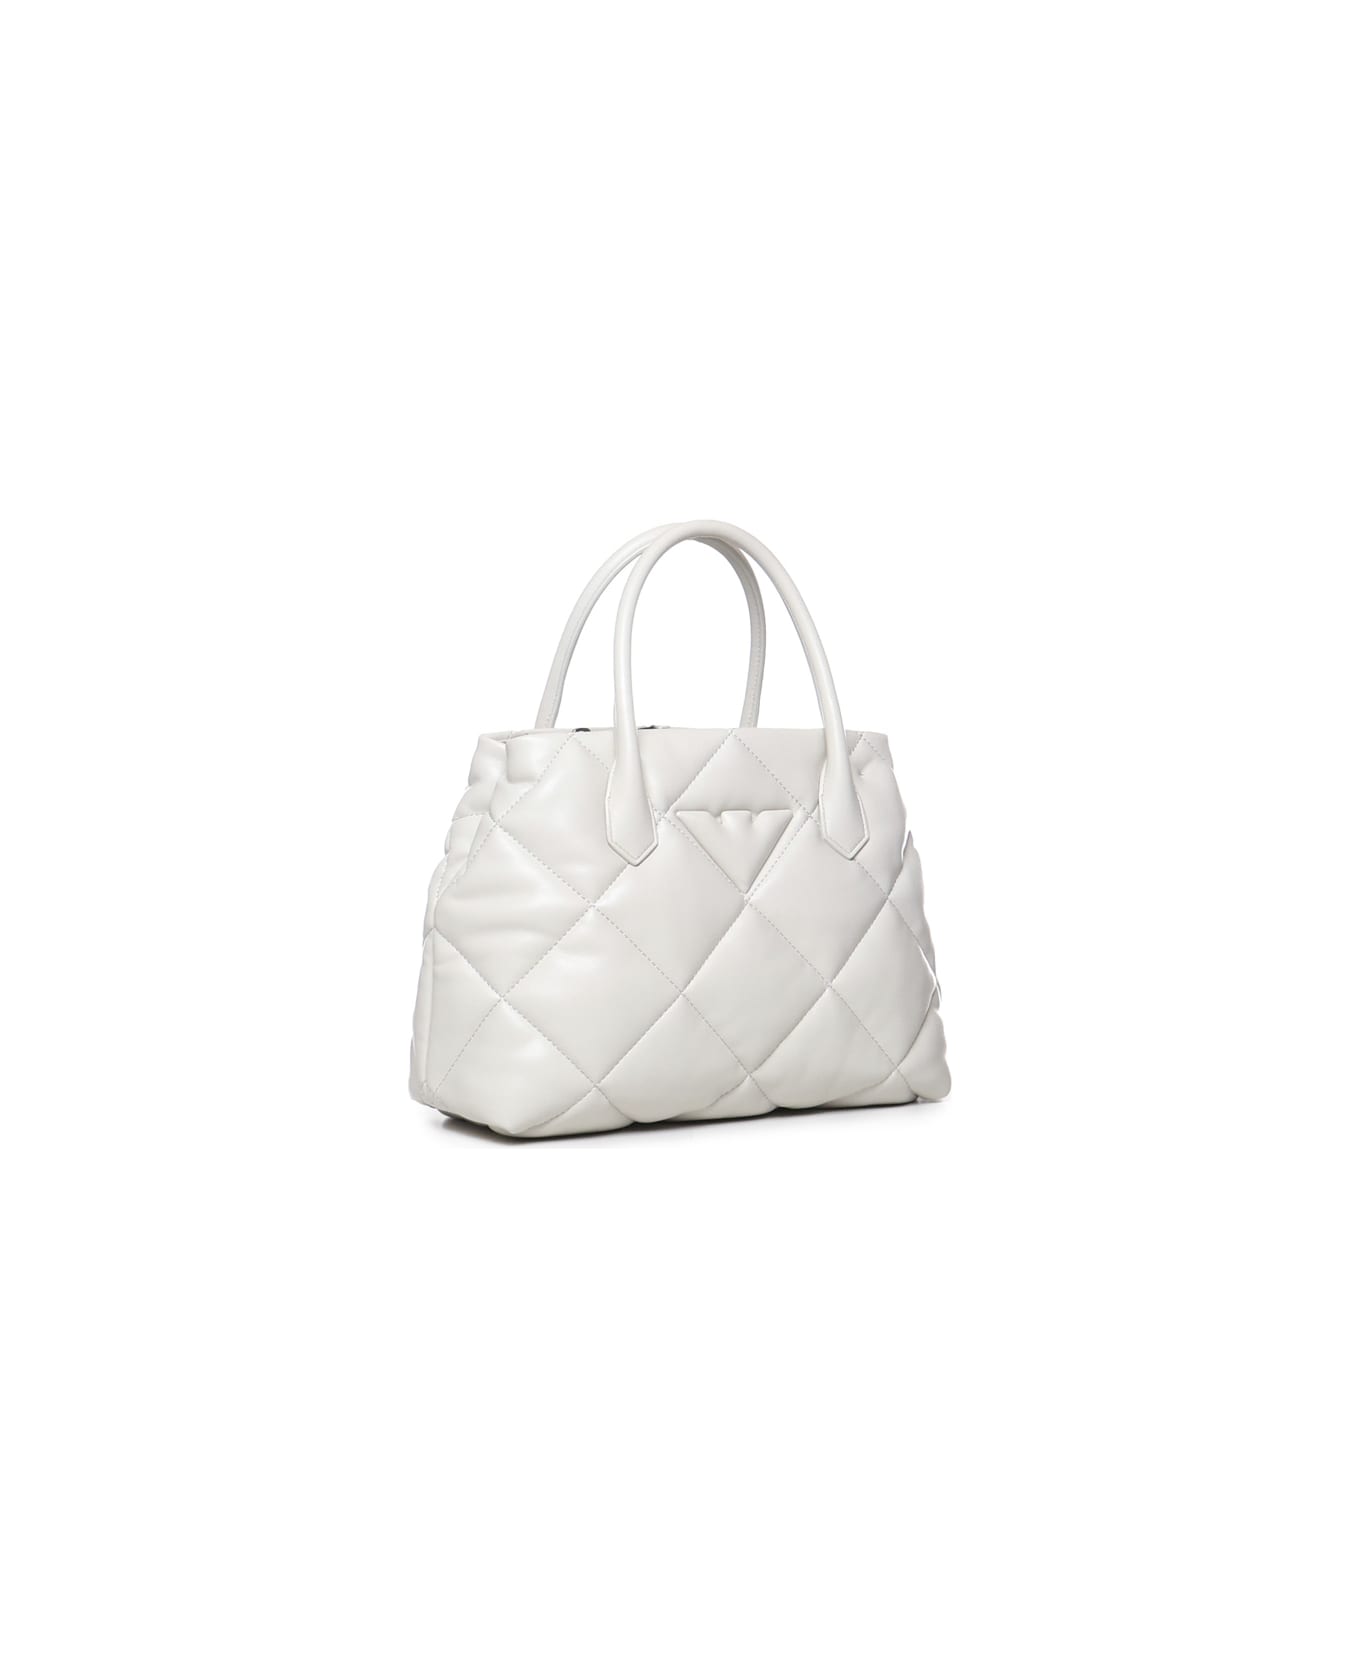 Emporio Armani Quilted Effect Hand Bag - White